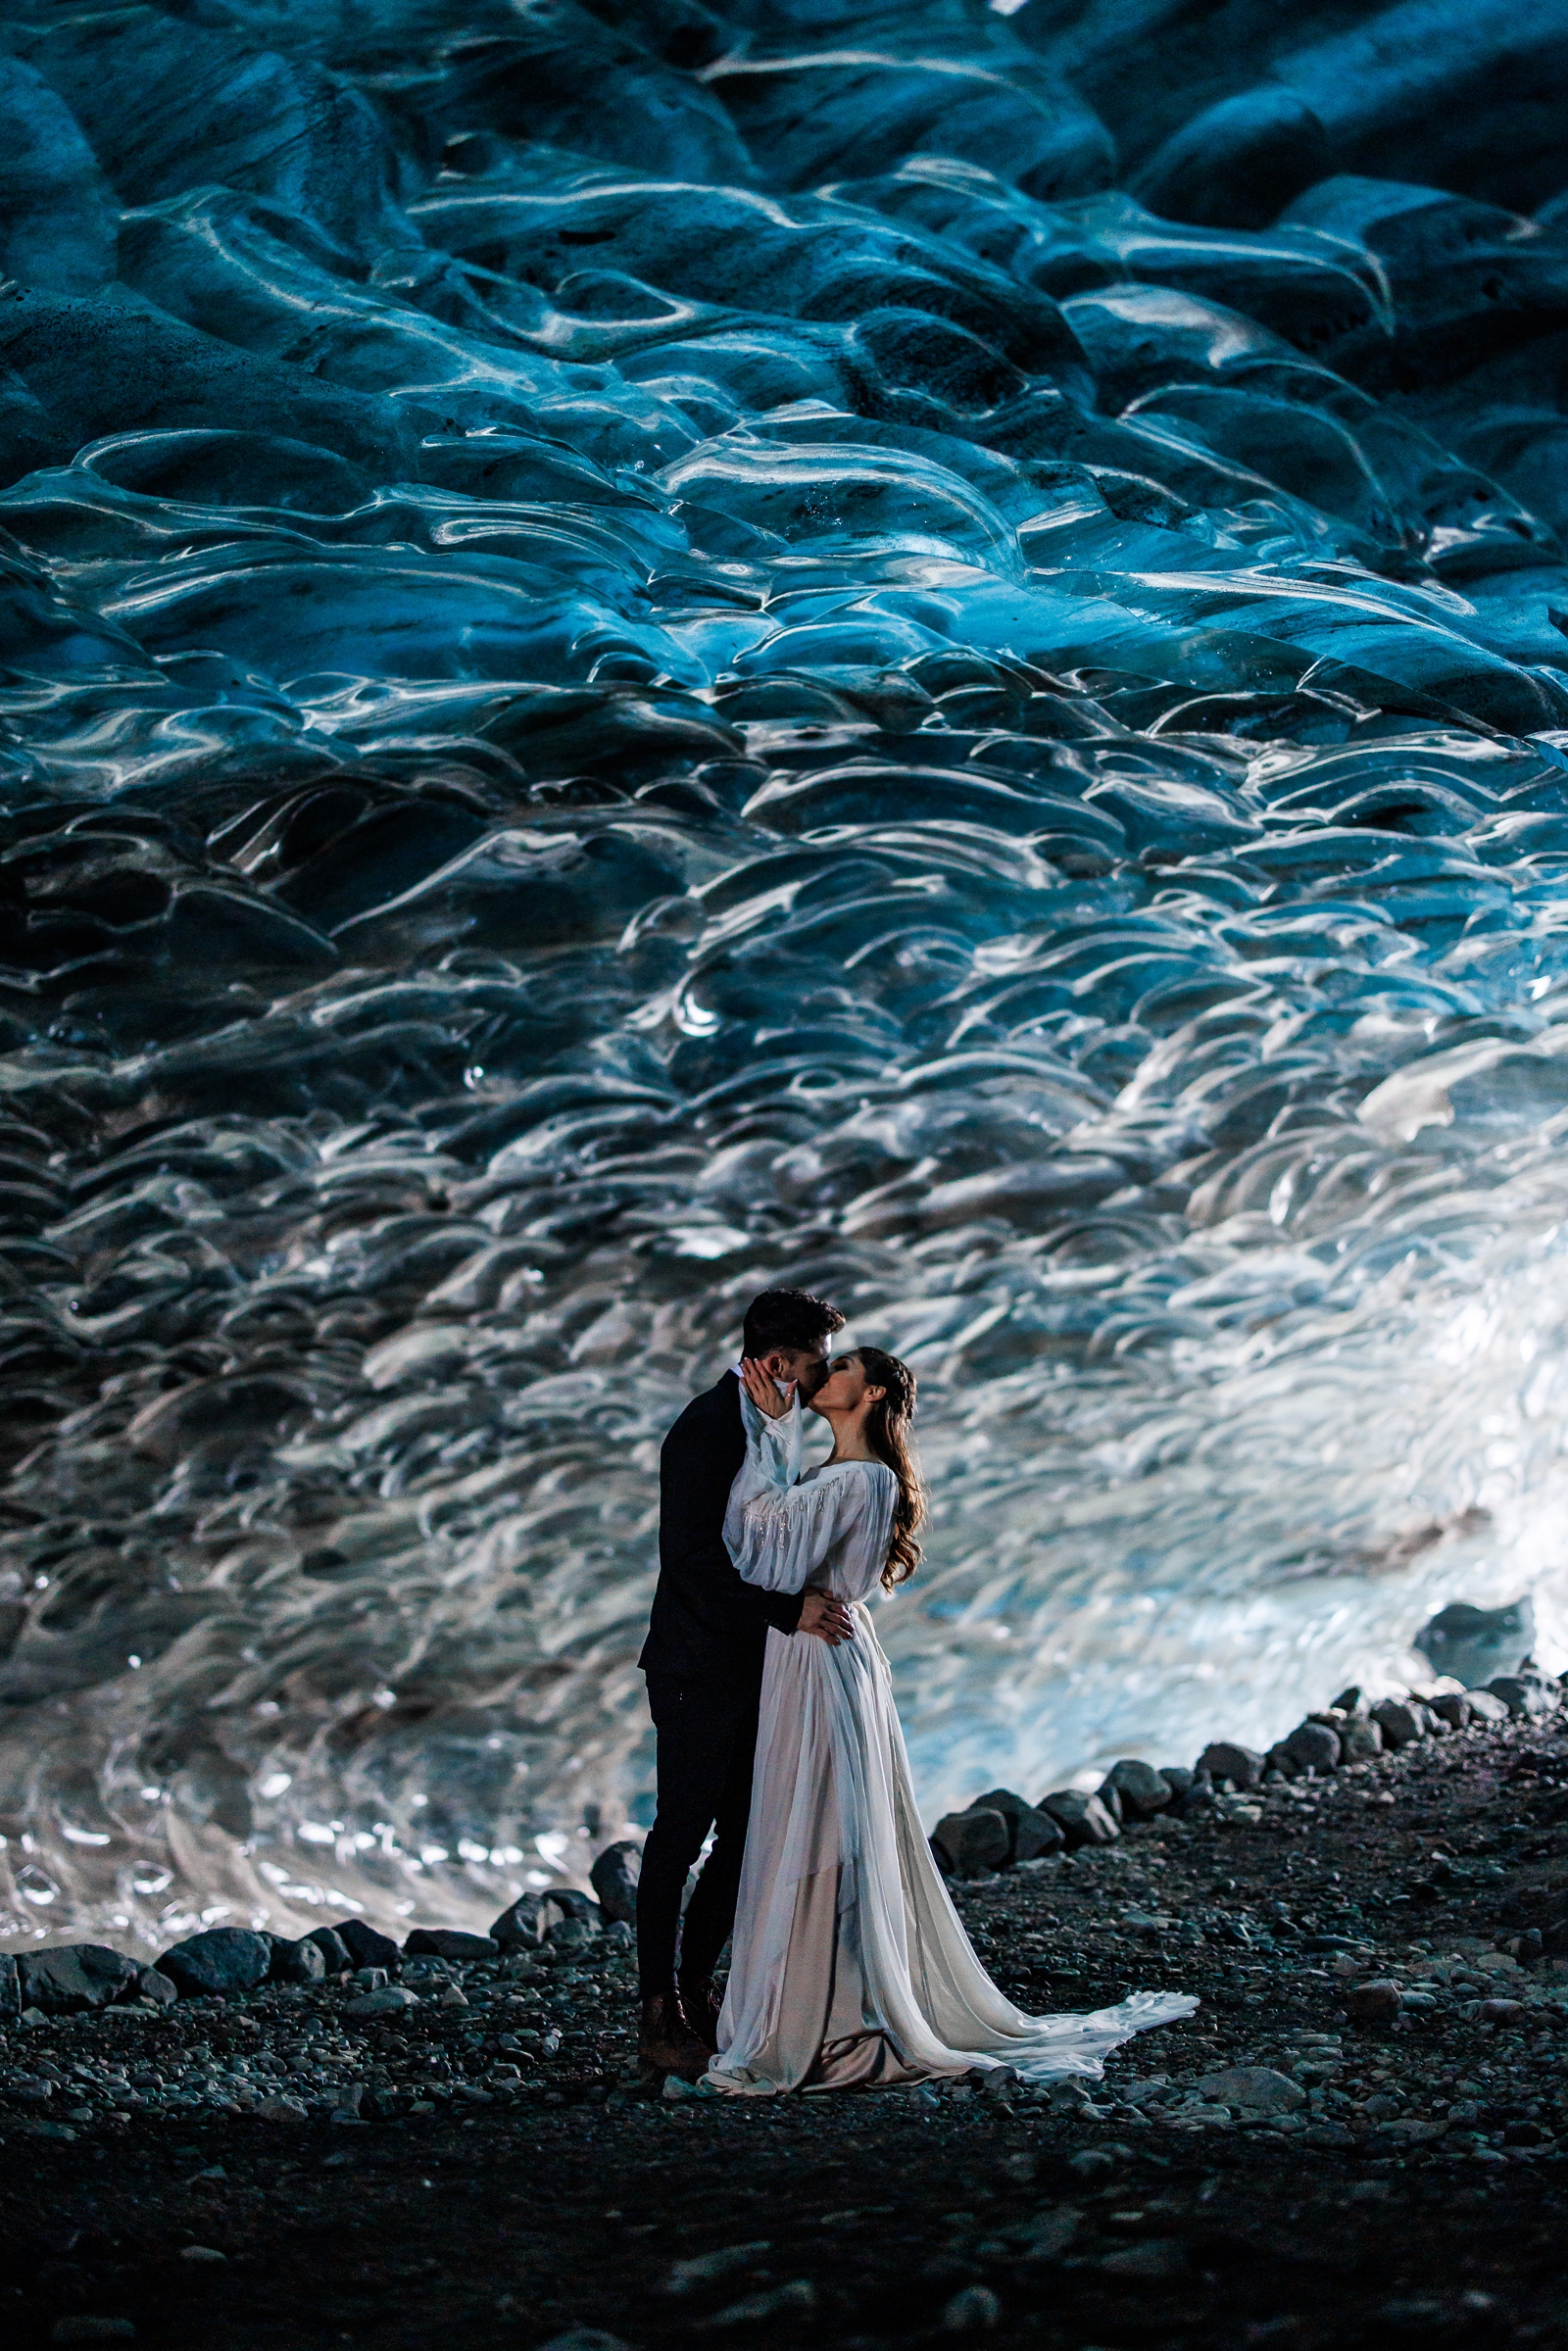 This couple just got married in a wintery Iceland ice cave.